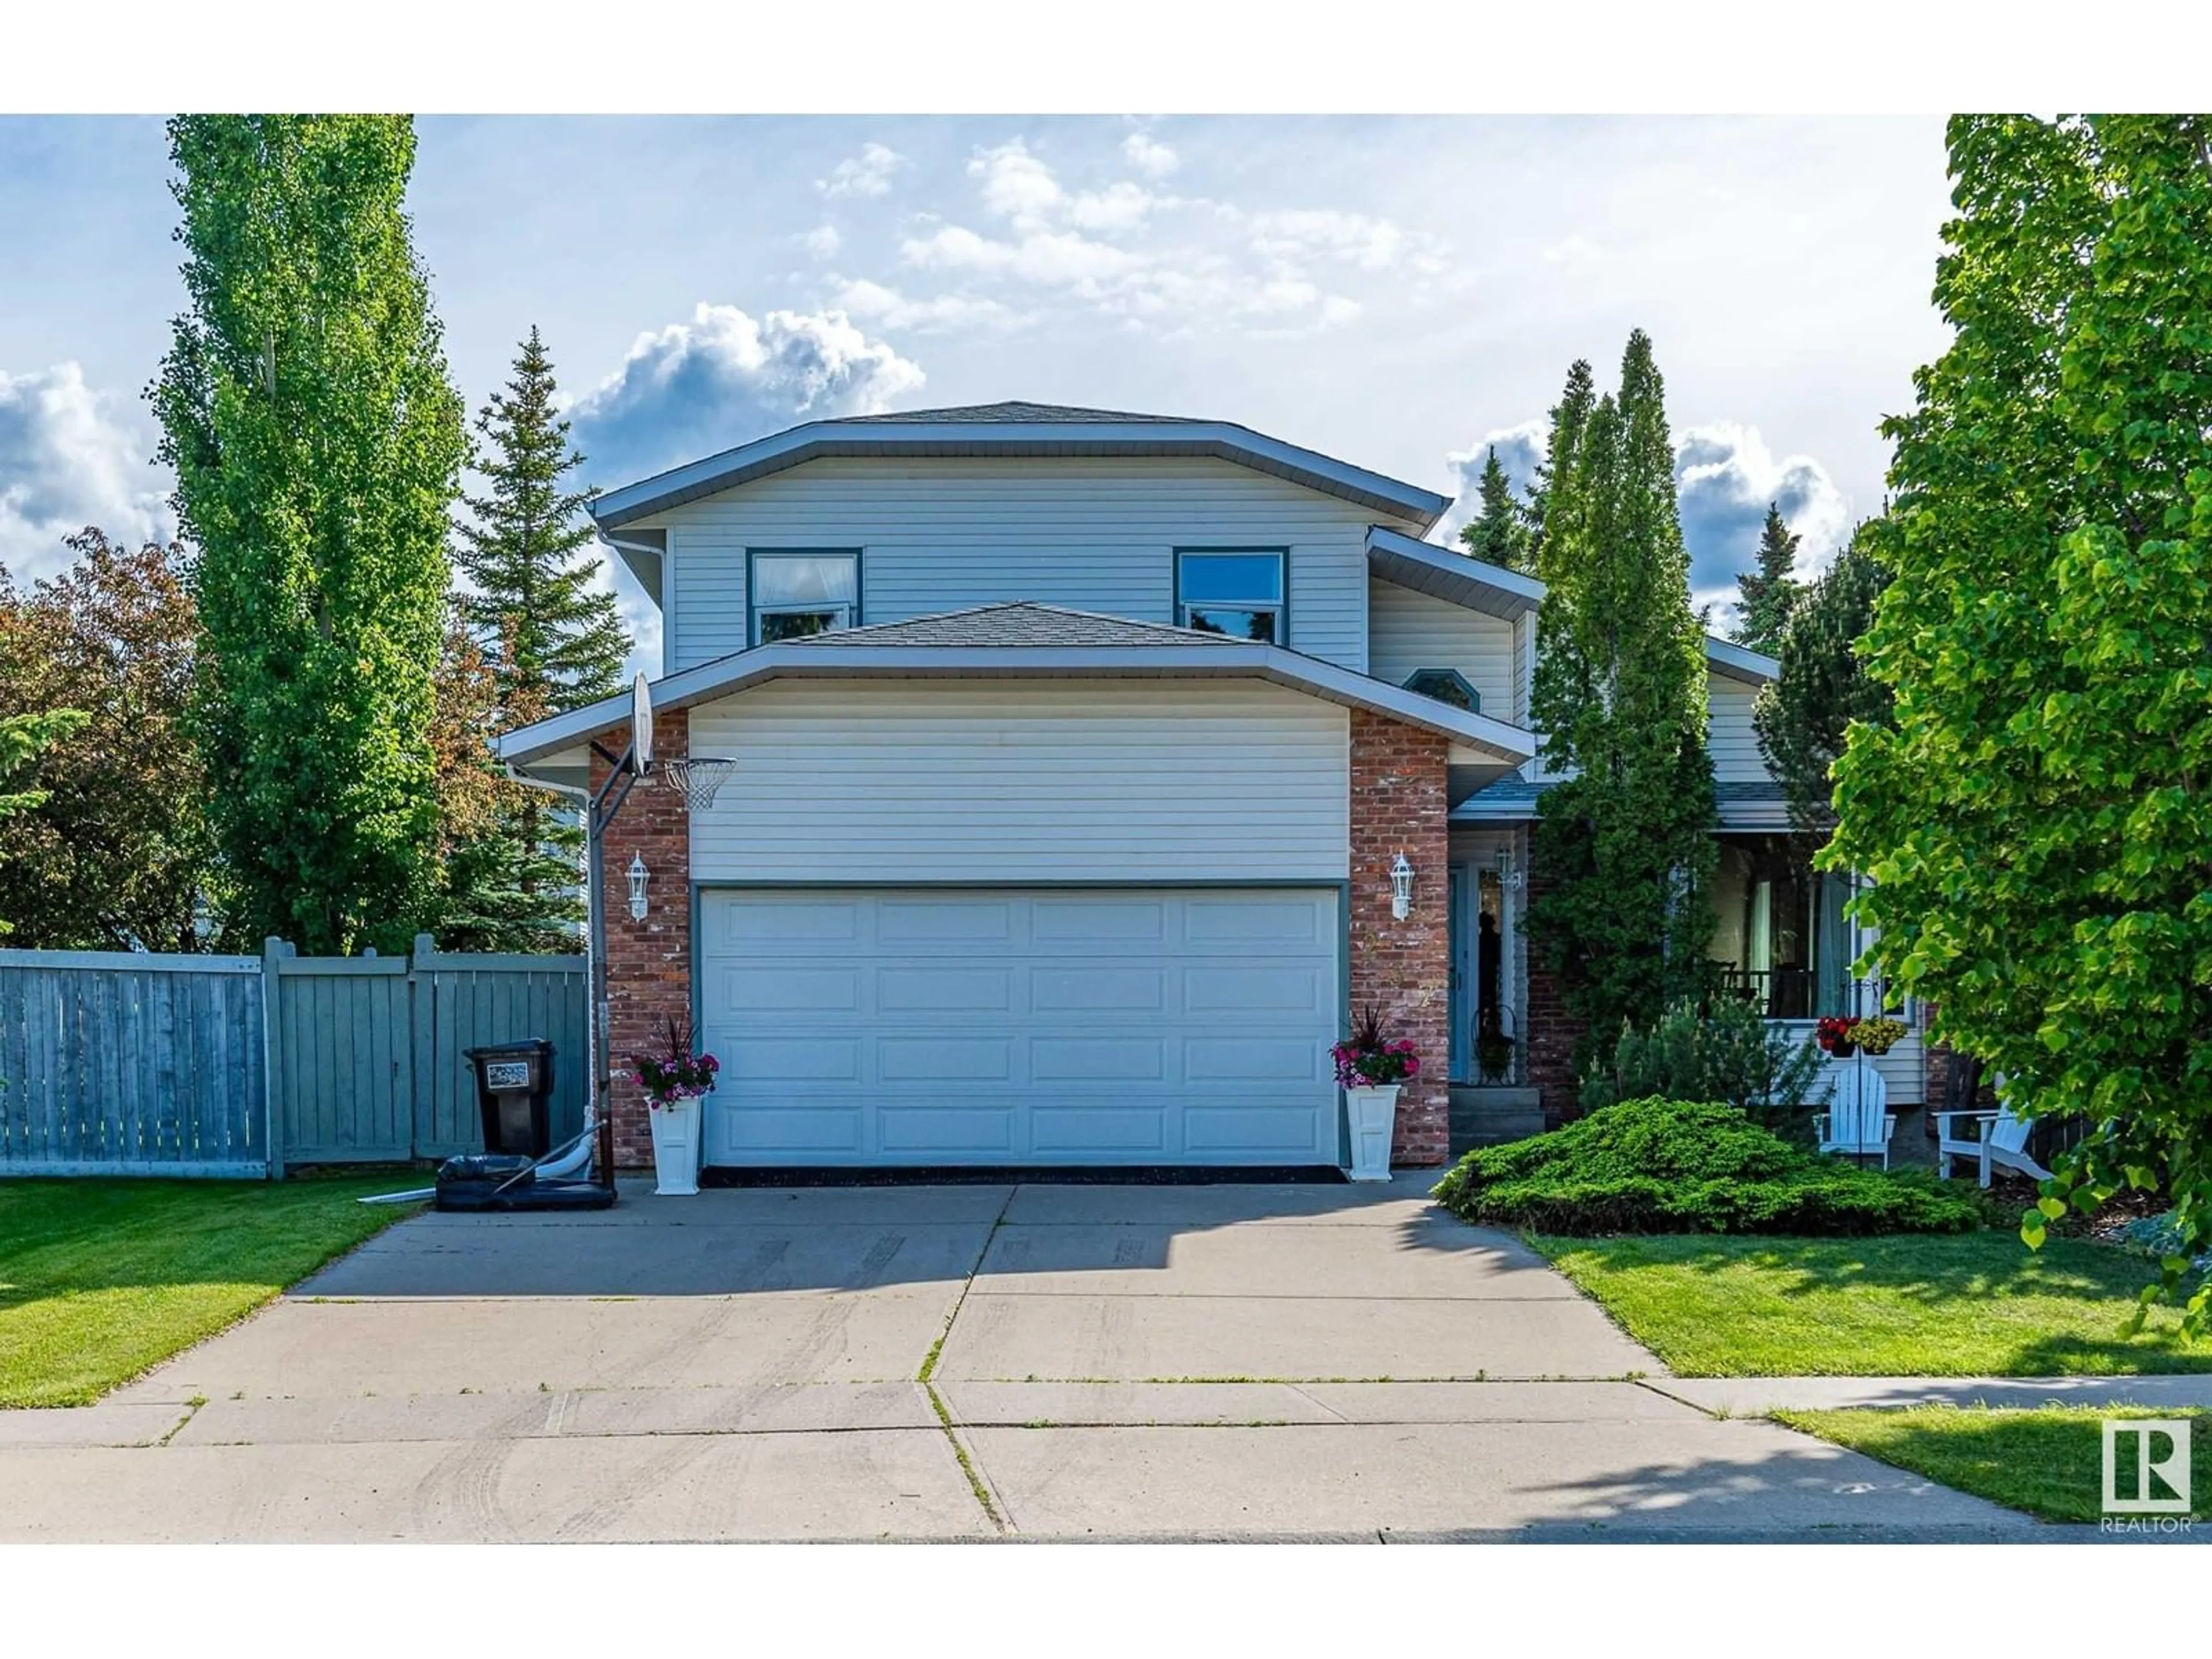 Frontside or backside of a home for 237 BURTON RD NW, Edmonton Alberta T6R1P6